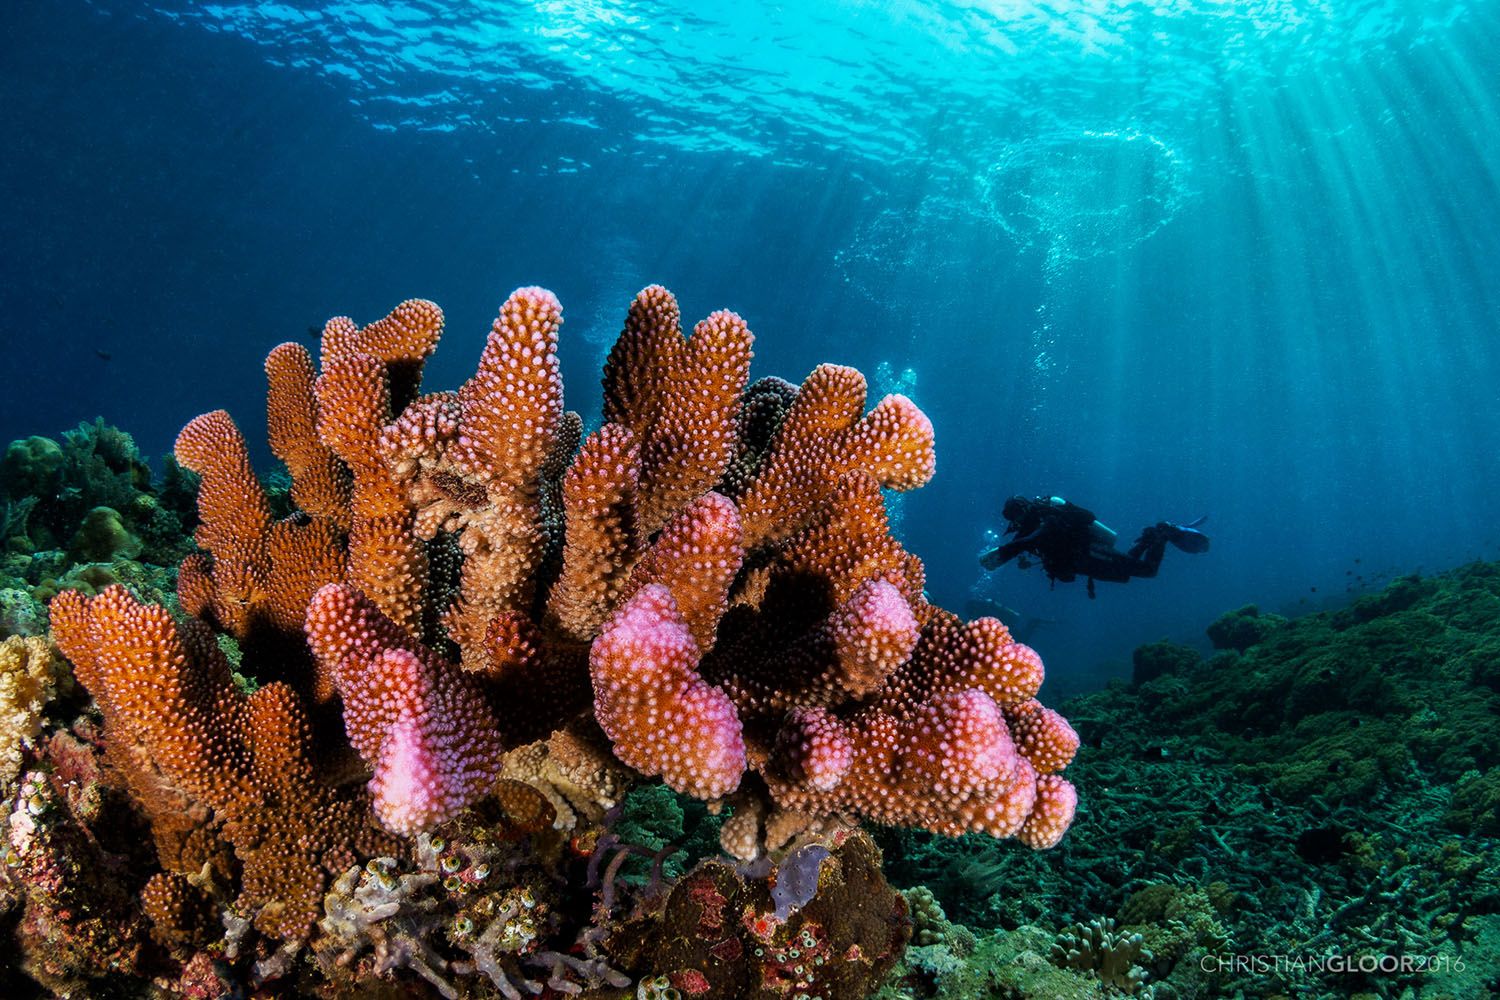 A close-up of reddish coral with a diver and the ocean surface in the background